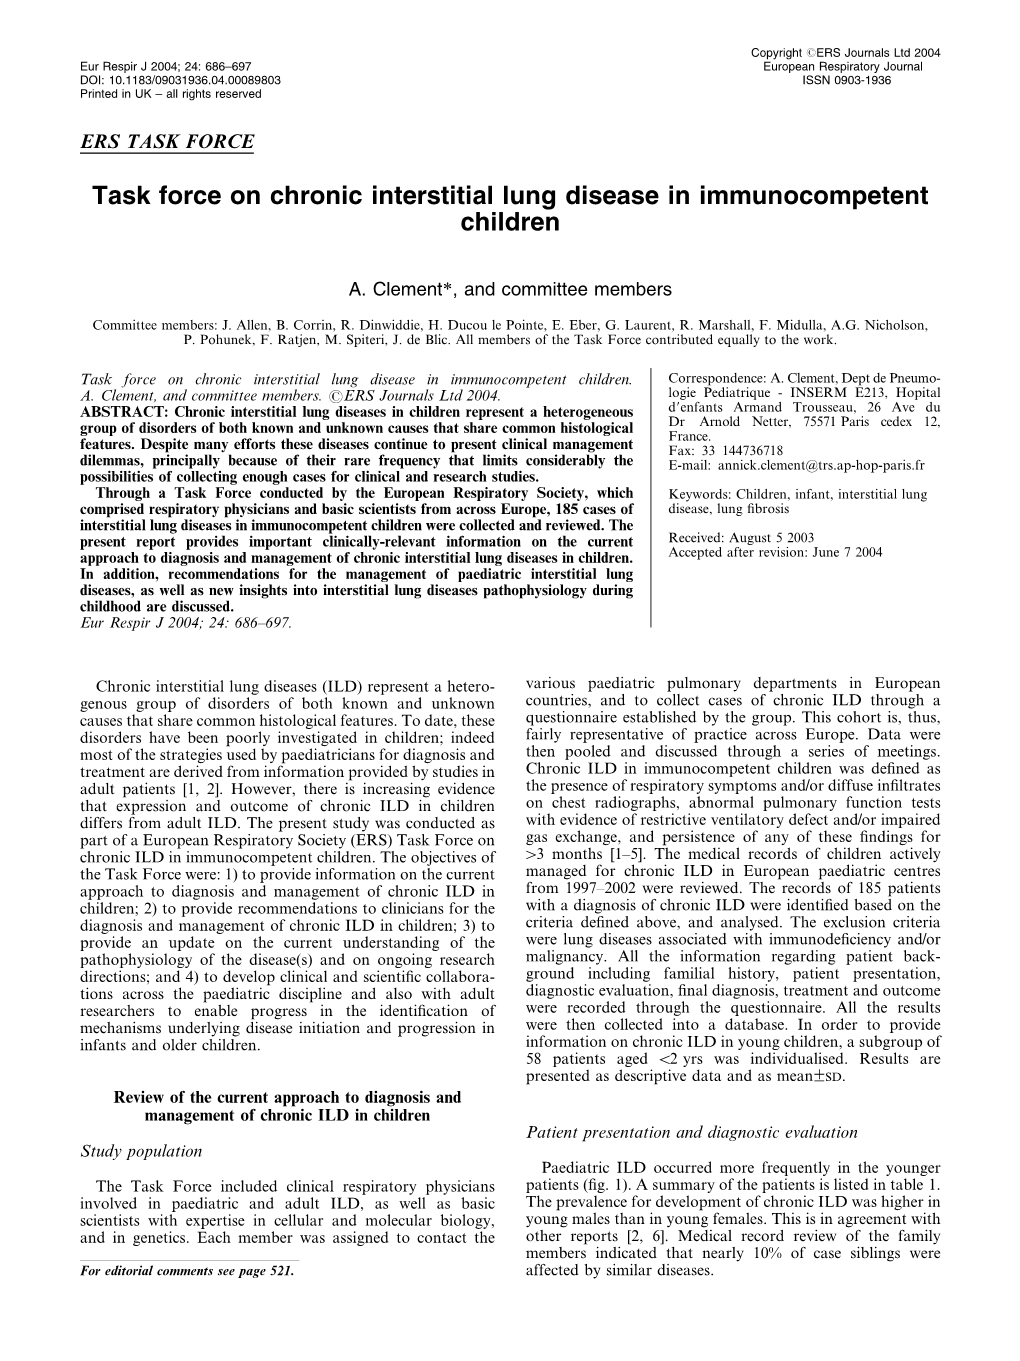 Task Force on Chronic Interstitial Lung Disease in Immunocompetent Children